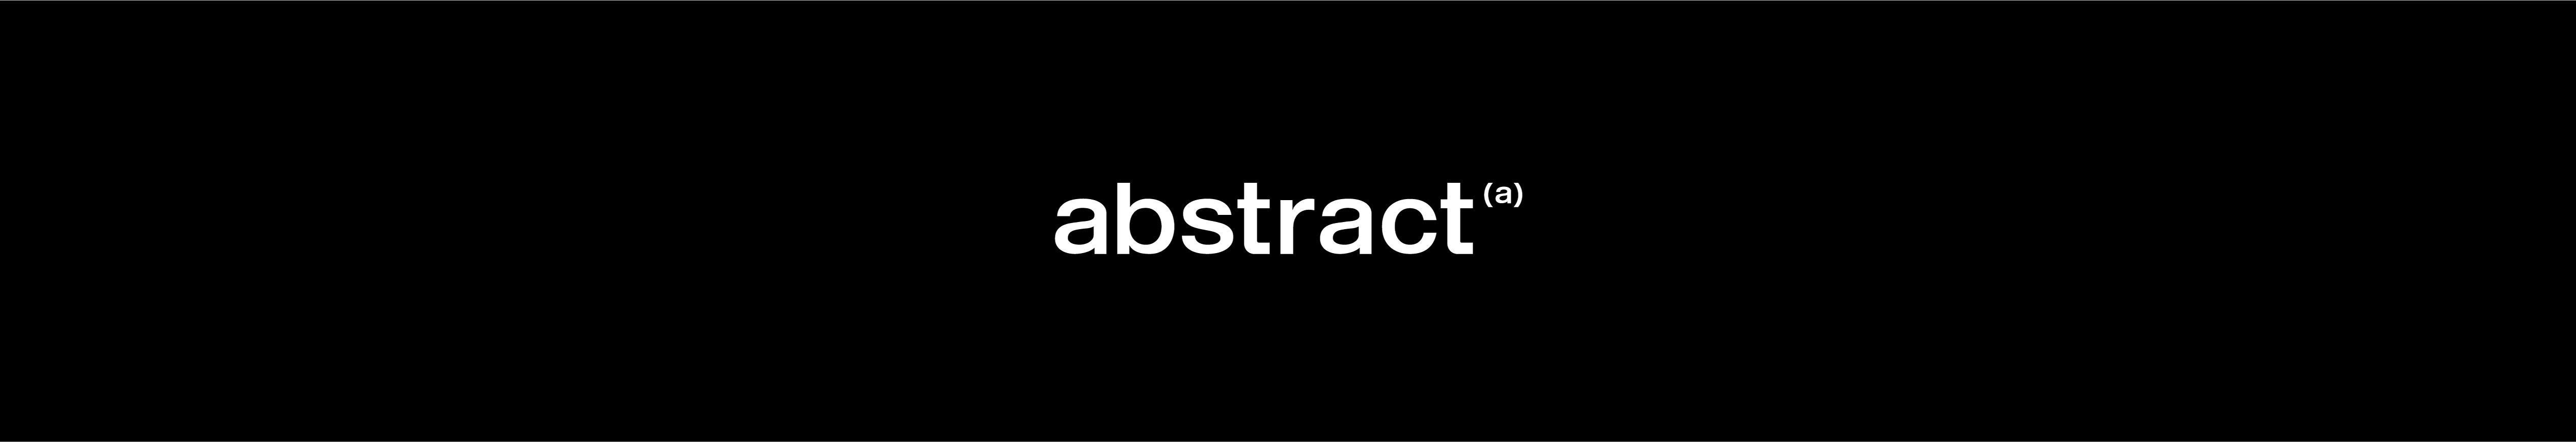 abstract .'s profile banner